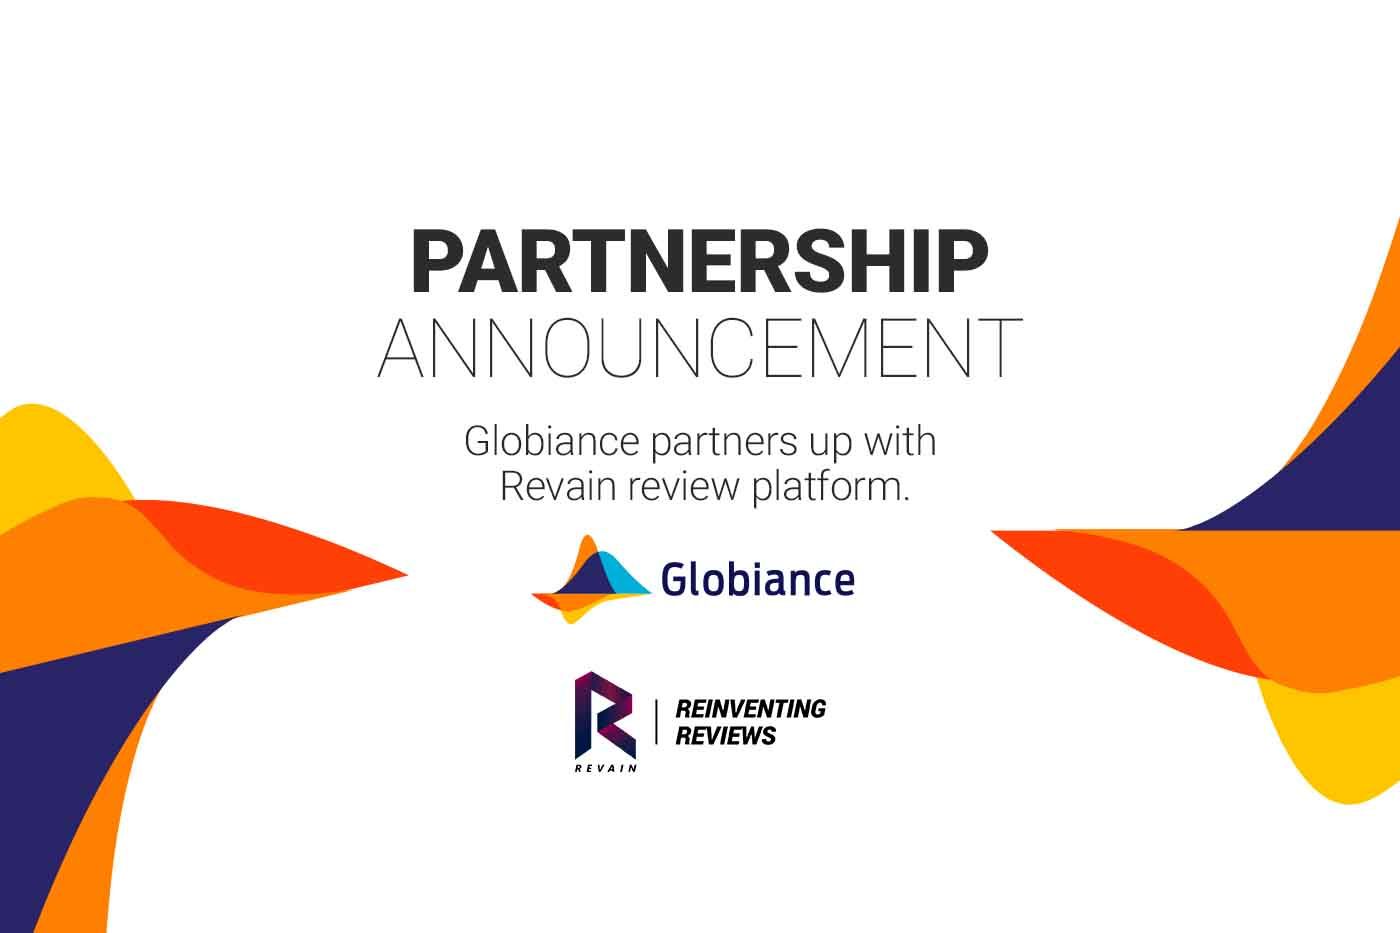 Revain announces a partnership with financial services company Globiance